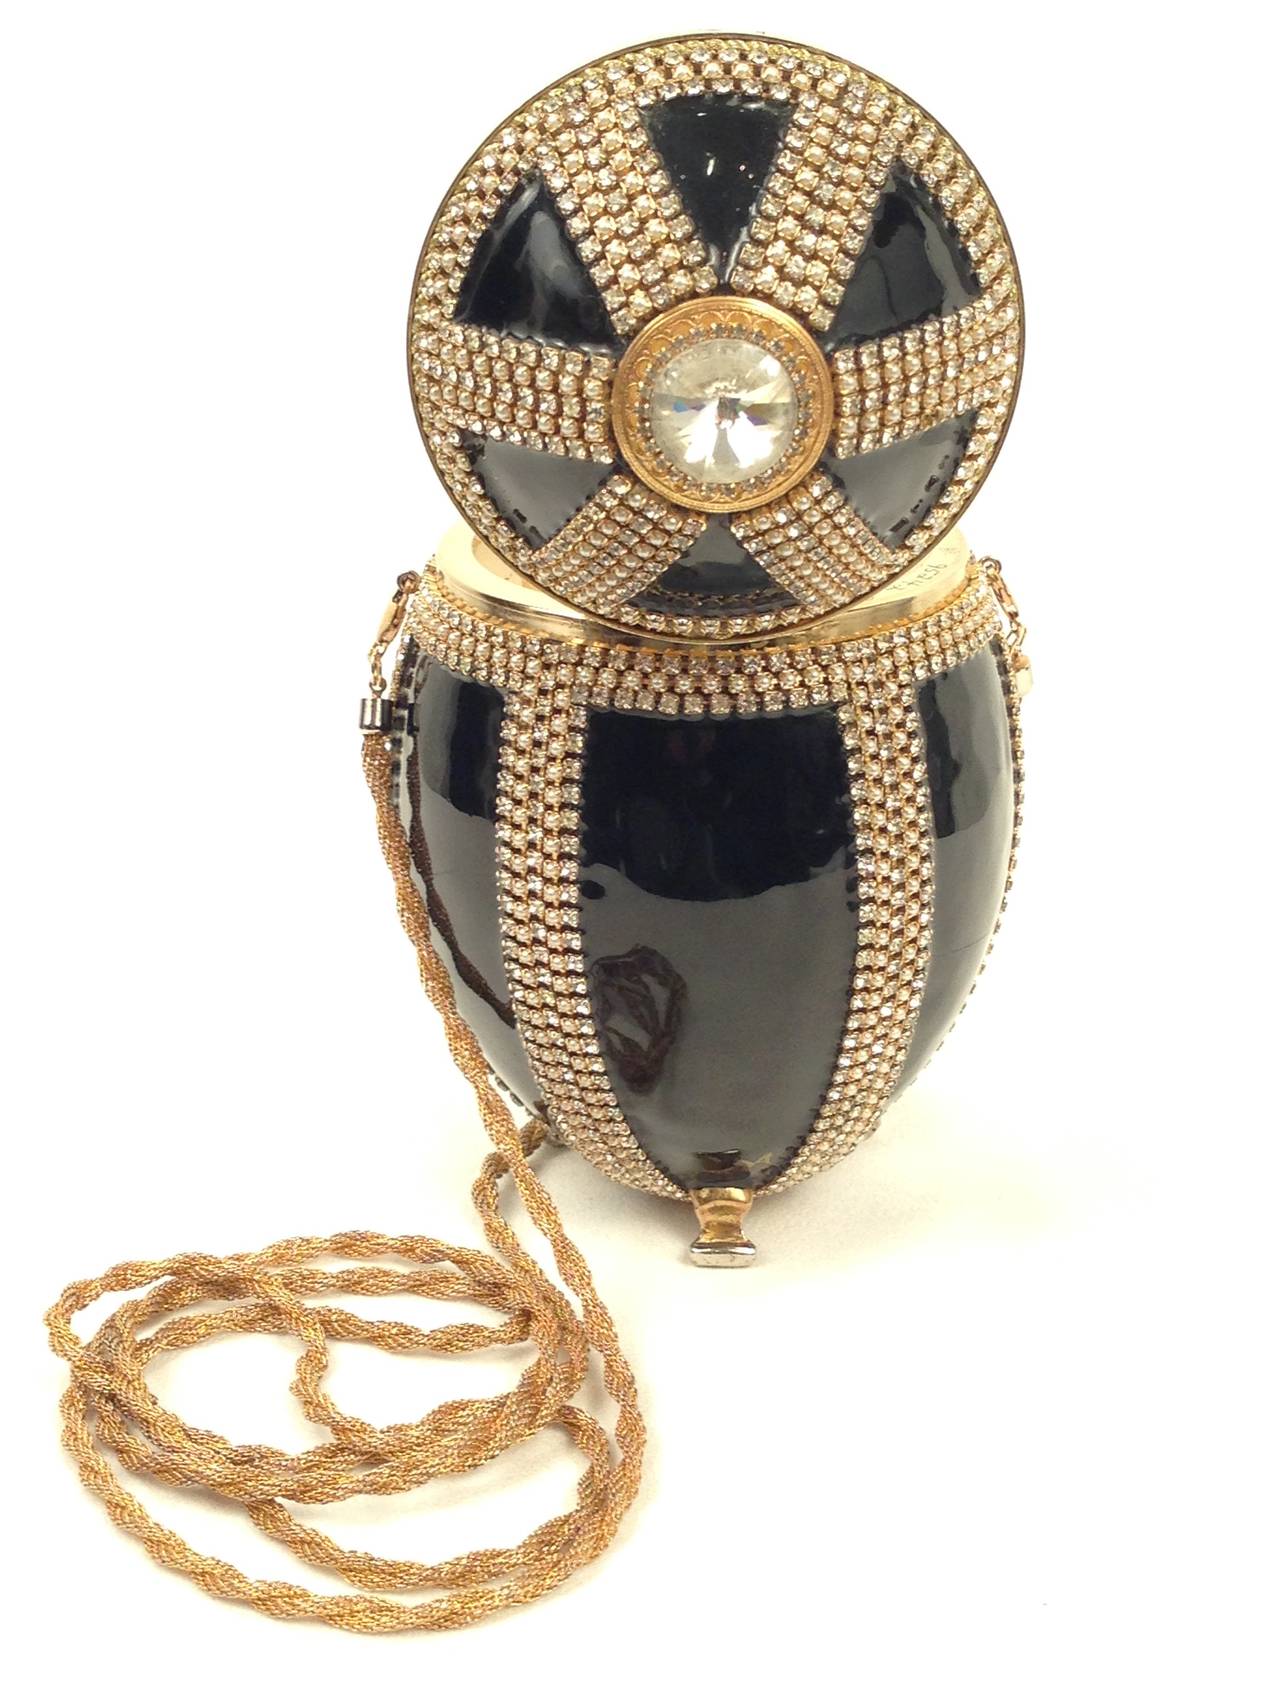 Cause a stir when carrying this exotic and luxurious minaudiere!  Vivian Alexander created the ostrich egg purse in 1990 and retired it in 2007. The enameled egg purse is made using techniques learned by Carl Faberge. Each purse begins with an